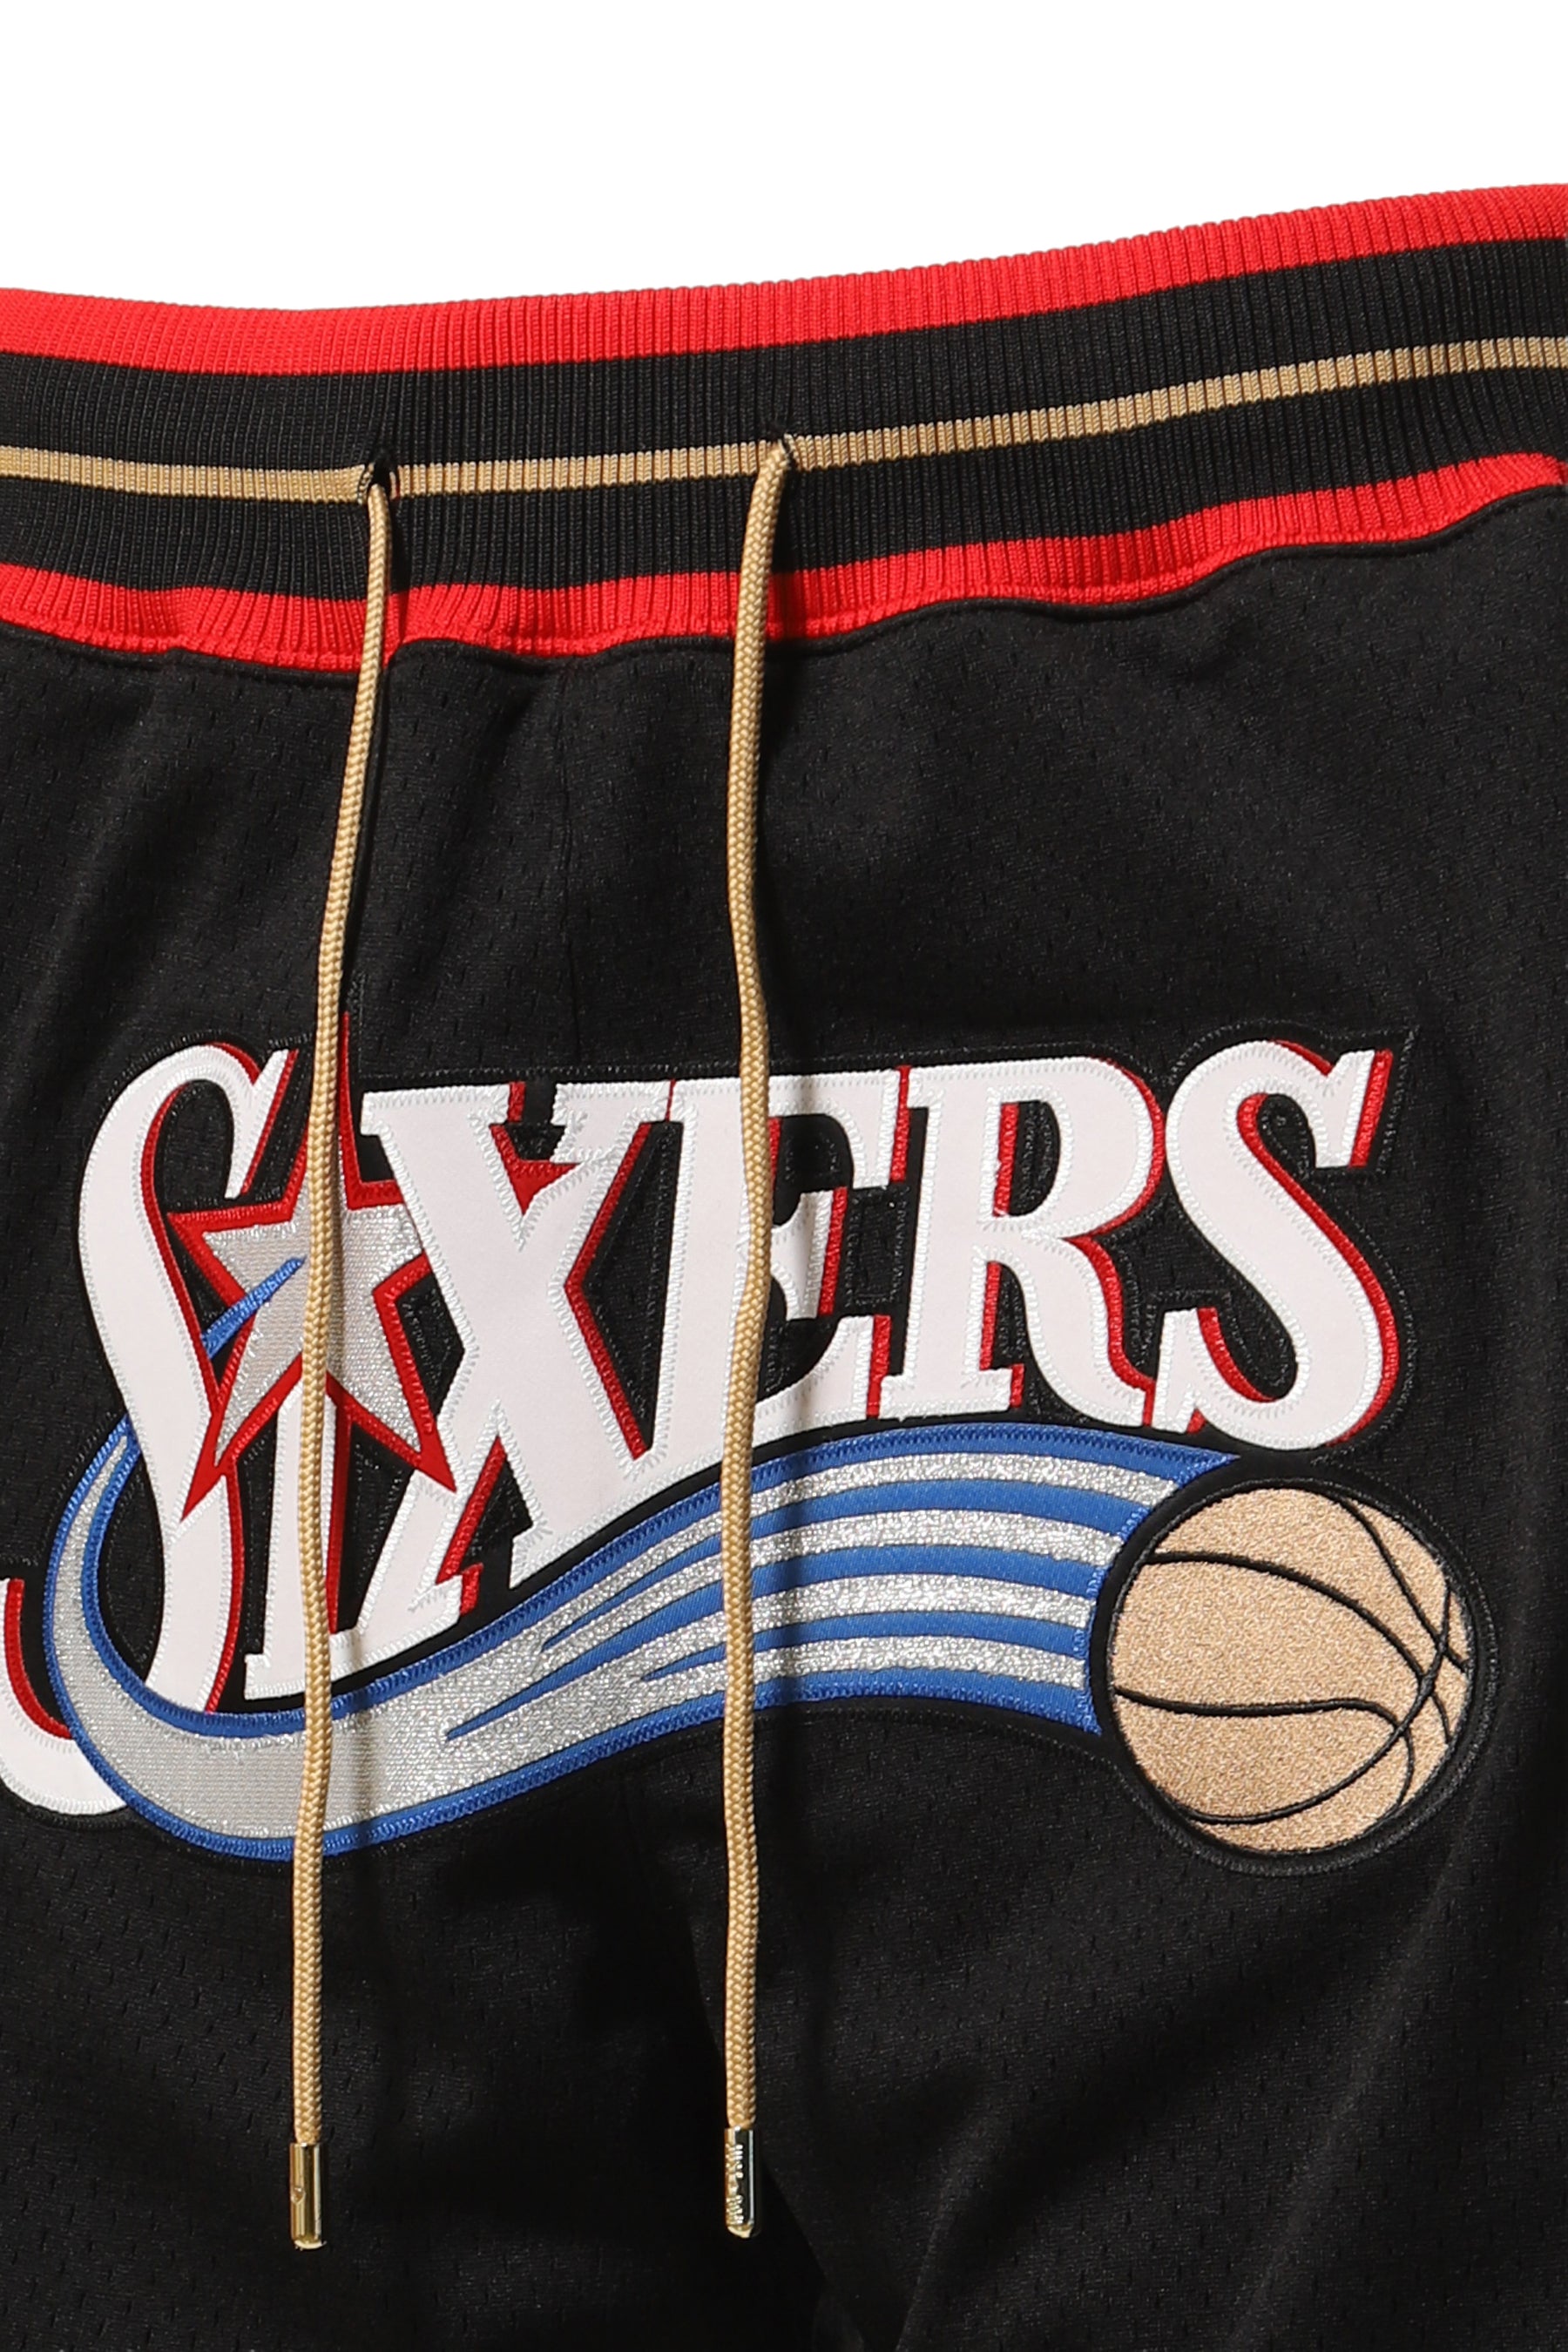 NBA JUST DON 7 INCH SHORTS 76ERS / BLK